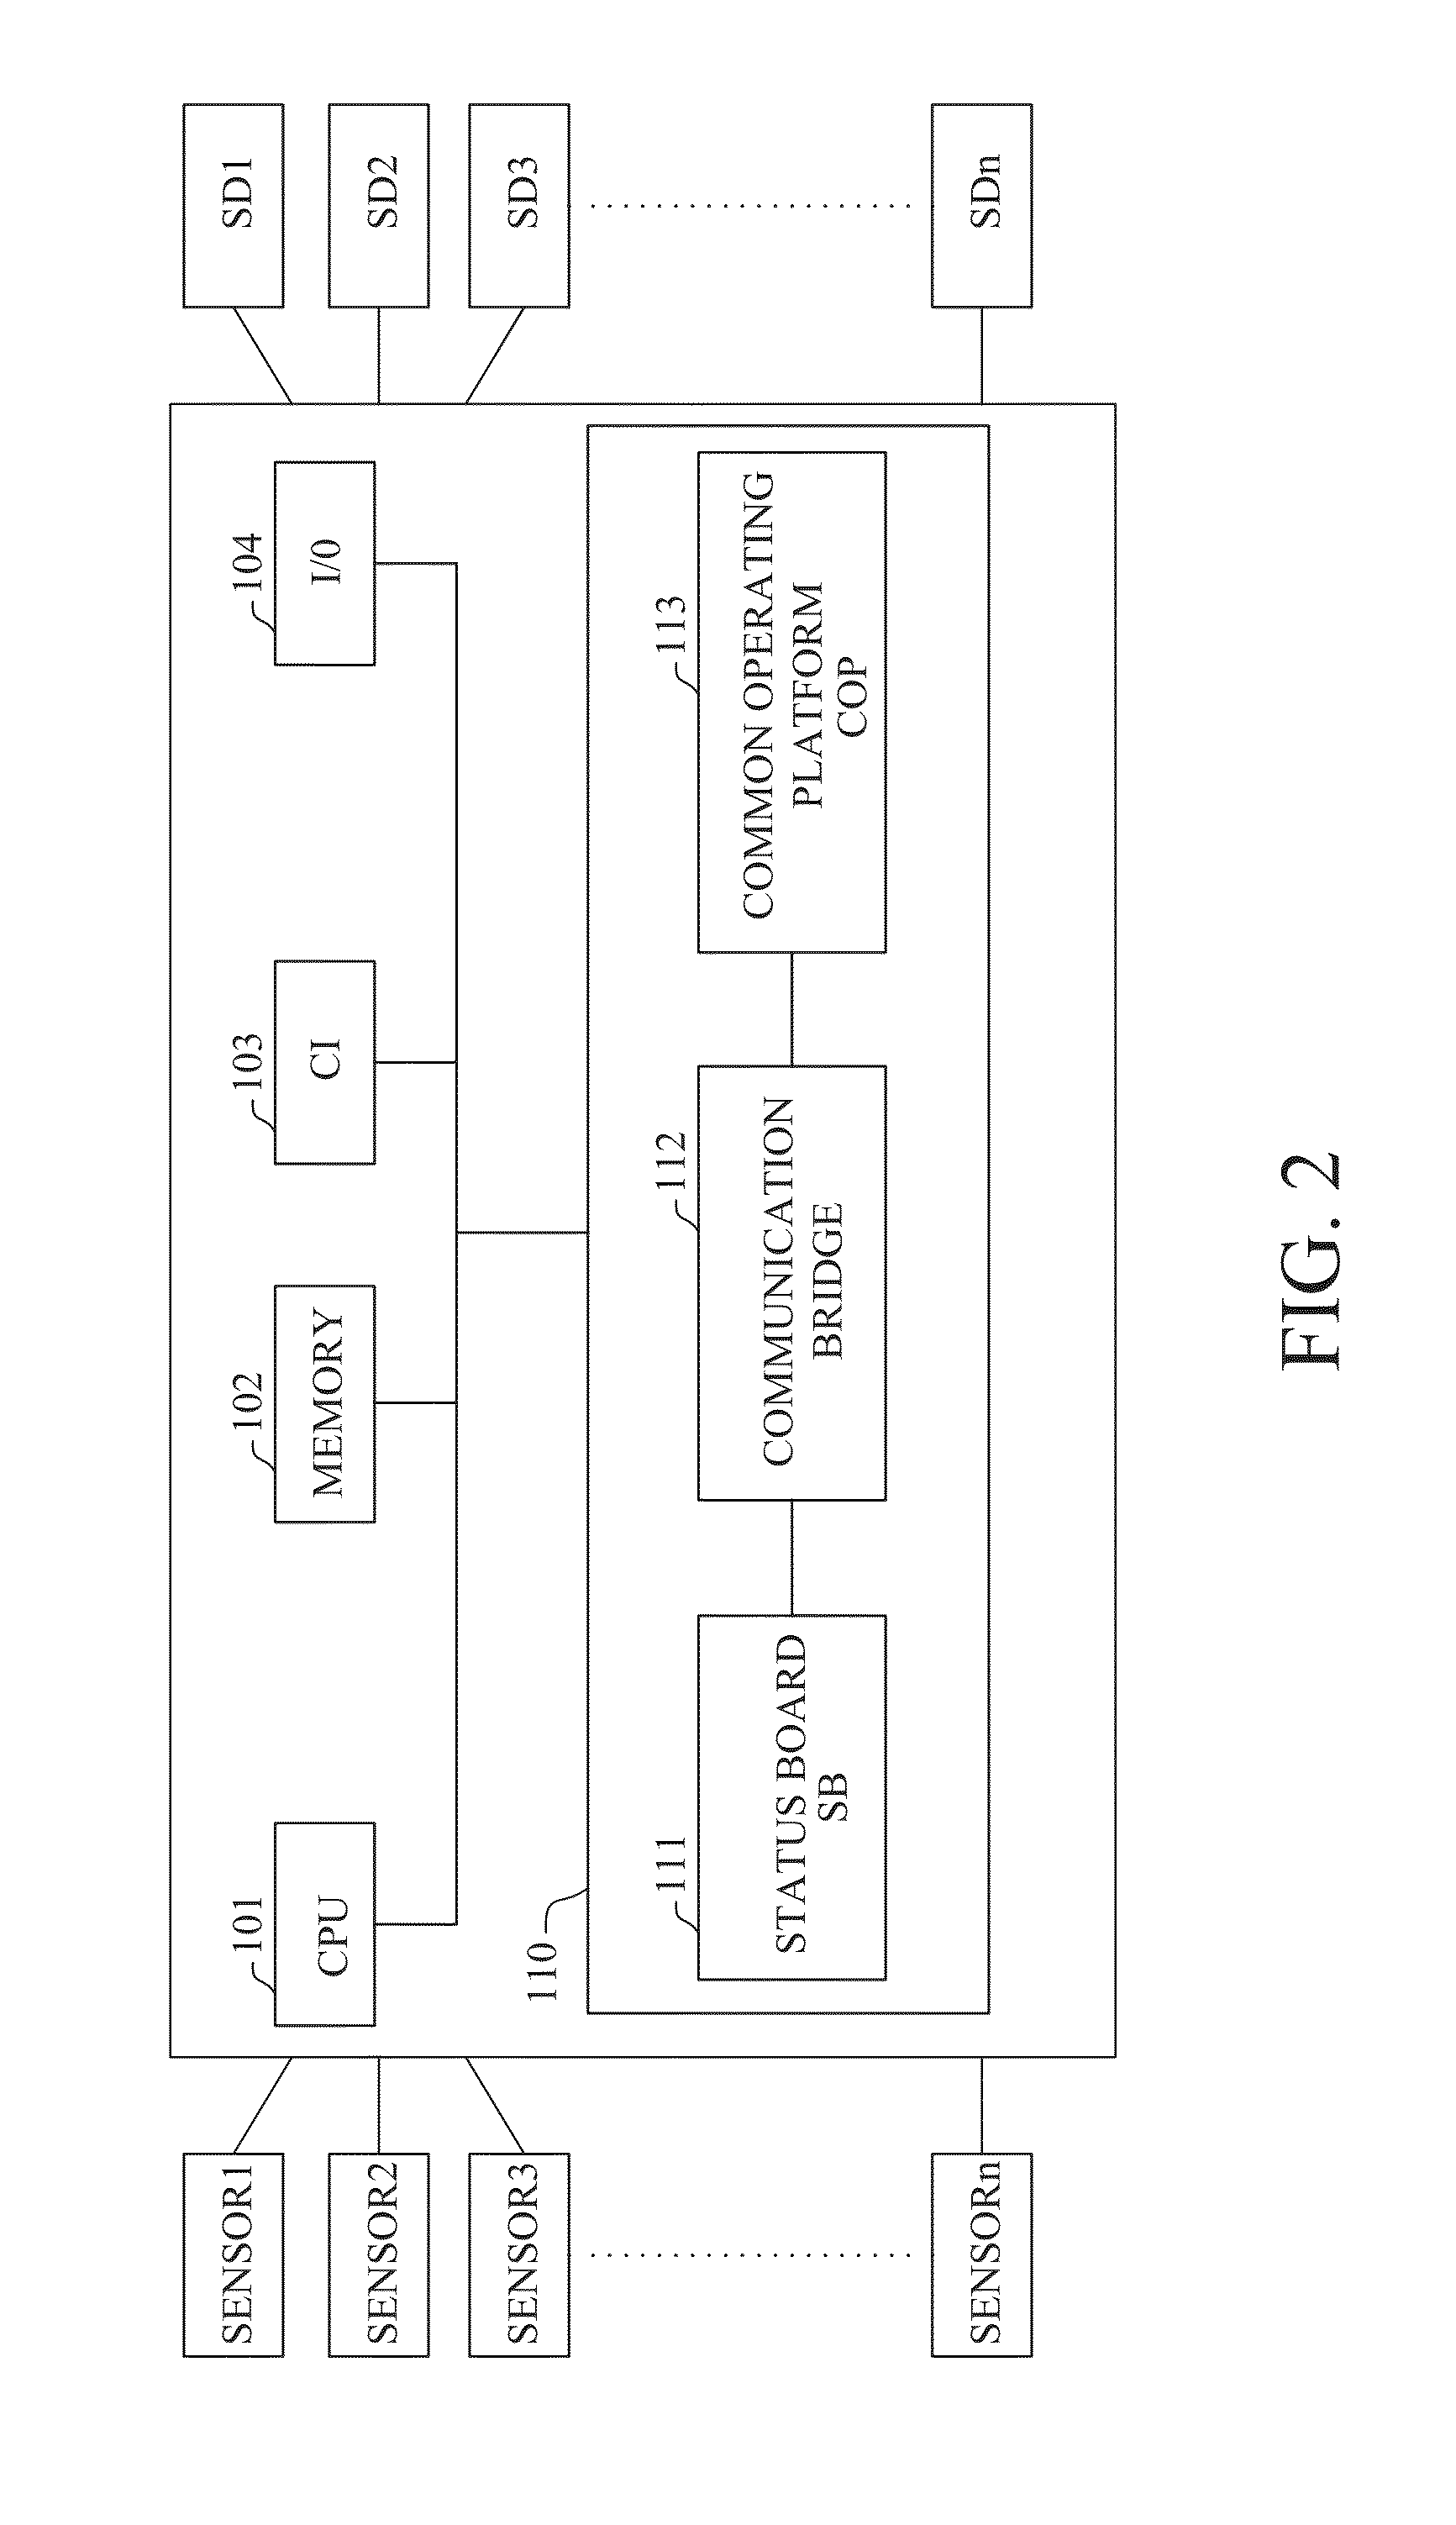 System and method for shared surveillance